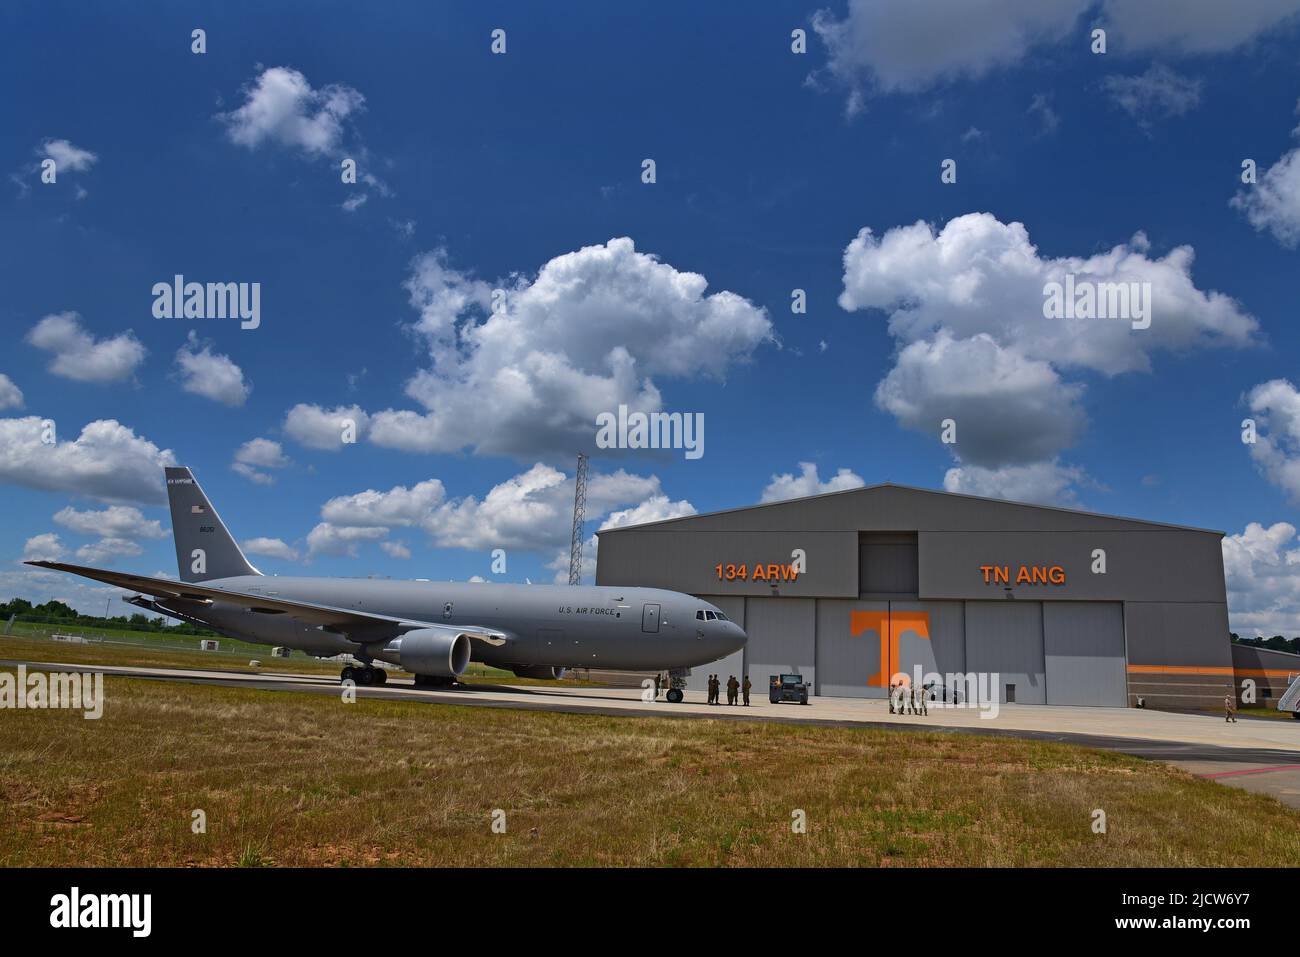 A KC-46A Pegasus, the new next generation refueling aircraft sits in front of the new aircraft hangar at McGhee Tyson ANG Base after the grand opening of the new $31 million facility on Jun. 3.  The KC-46, from the 157th Air Refueling Wing, New Hampshire, was parked in the hangar on display during the event. Stock Photo